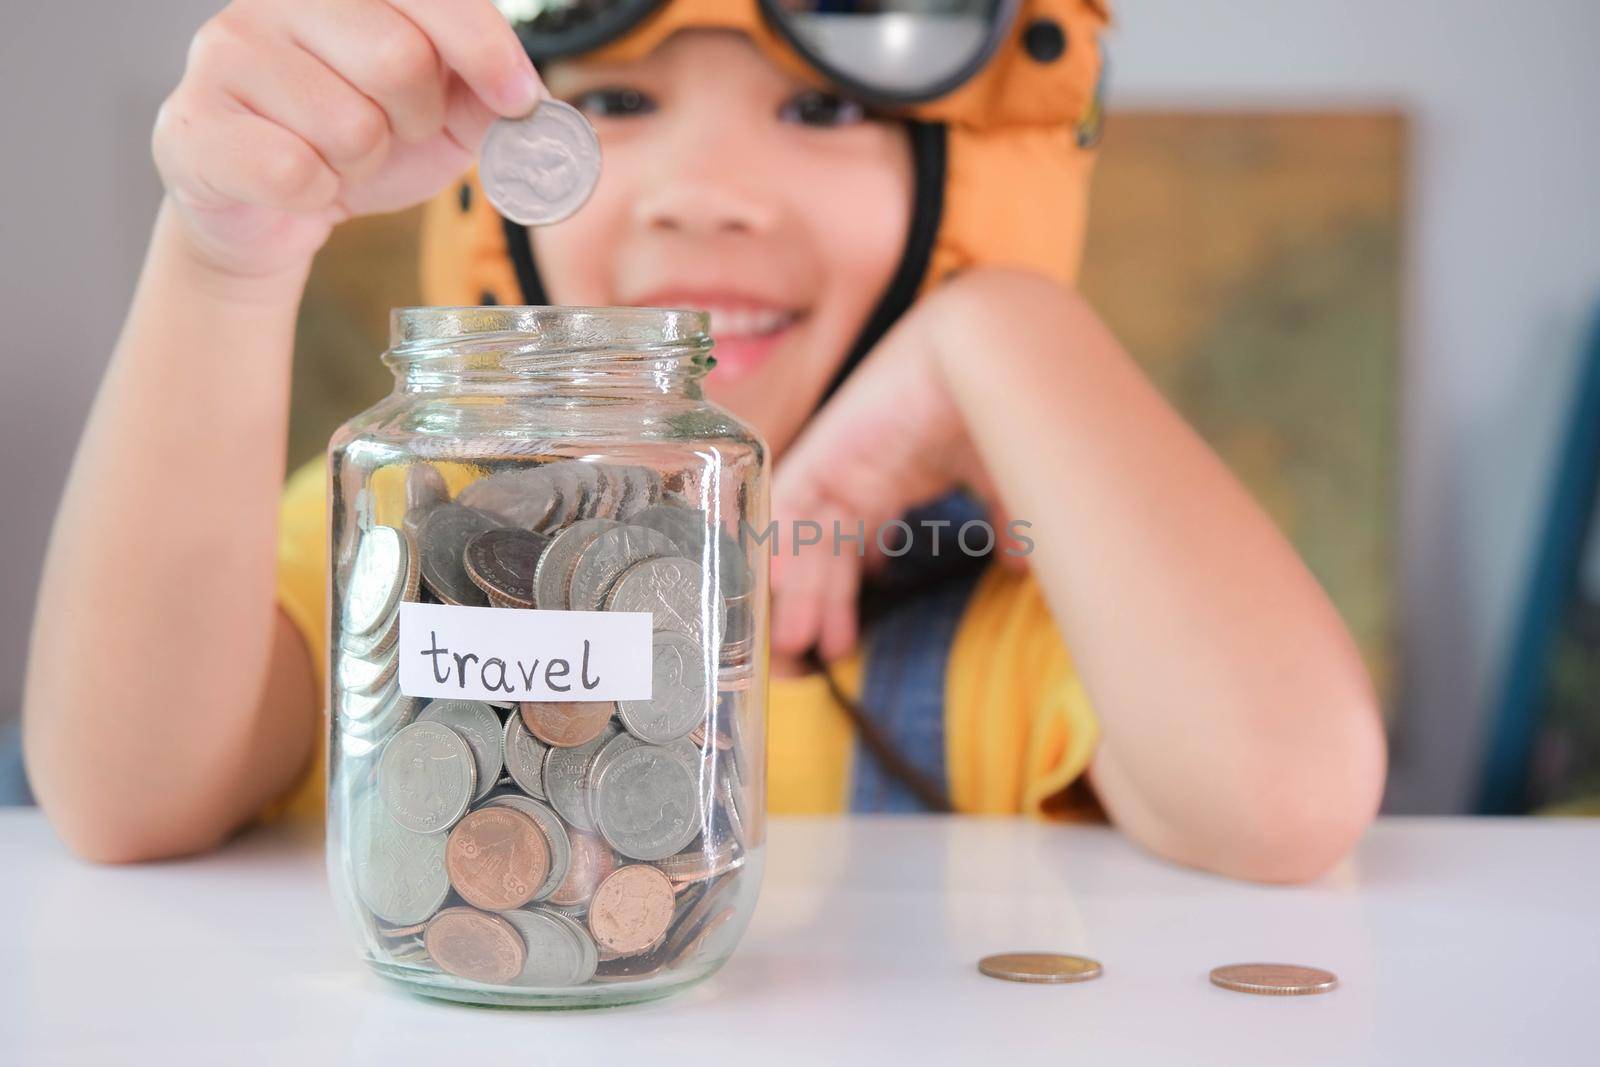 Cute little girl in a pilot hat is putting coins in a clear jar on the table to save for travel. Childhood dream imagination and Travel concepts. by TEERASAK